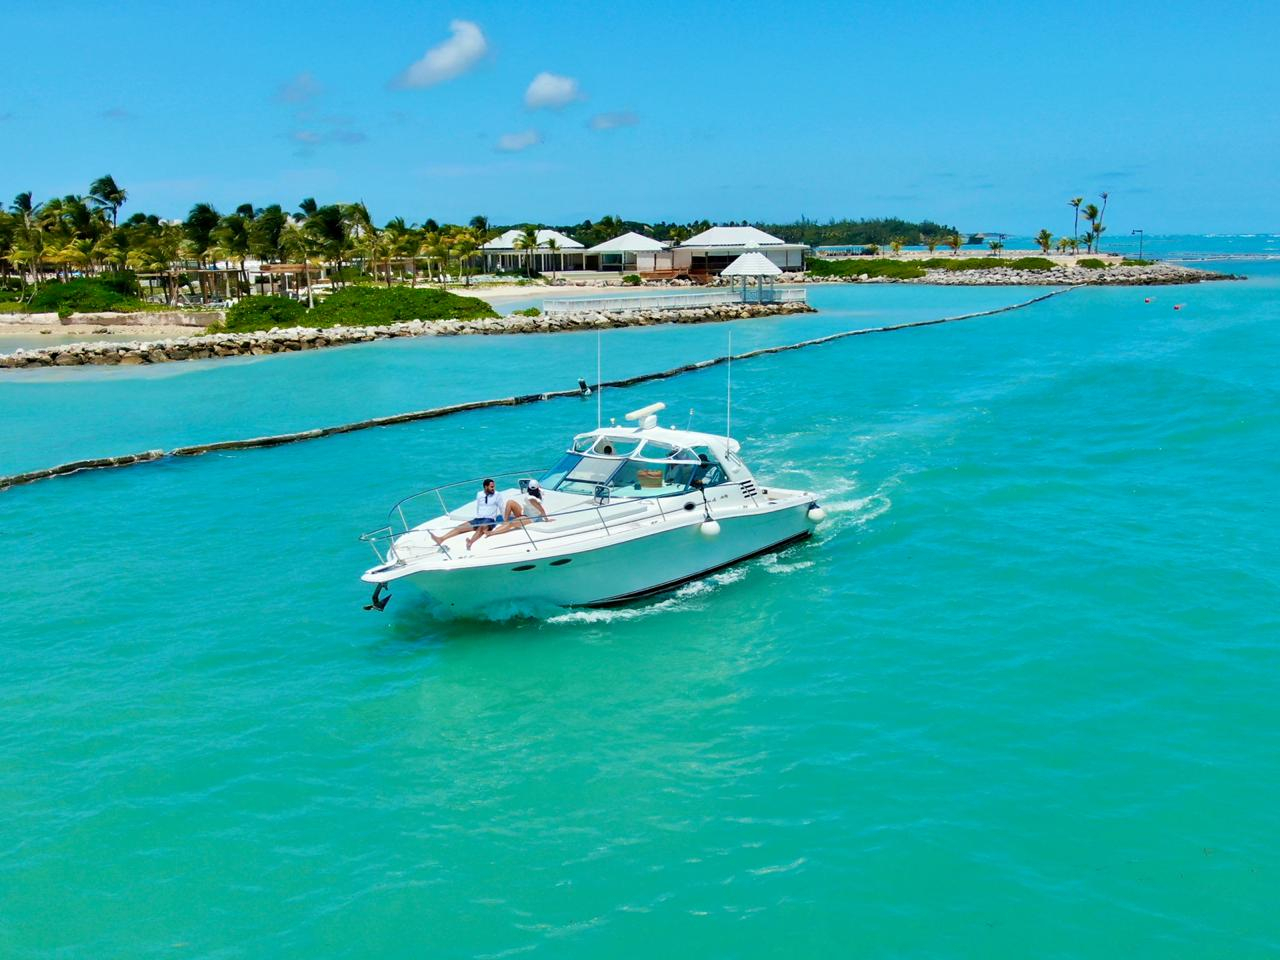 Cap Cana yacht for rent Punta Cana private tour boat charter